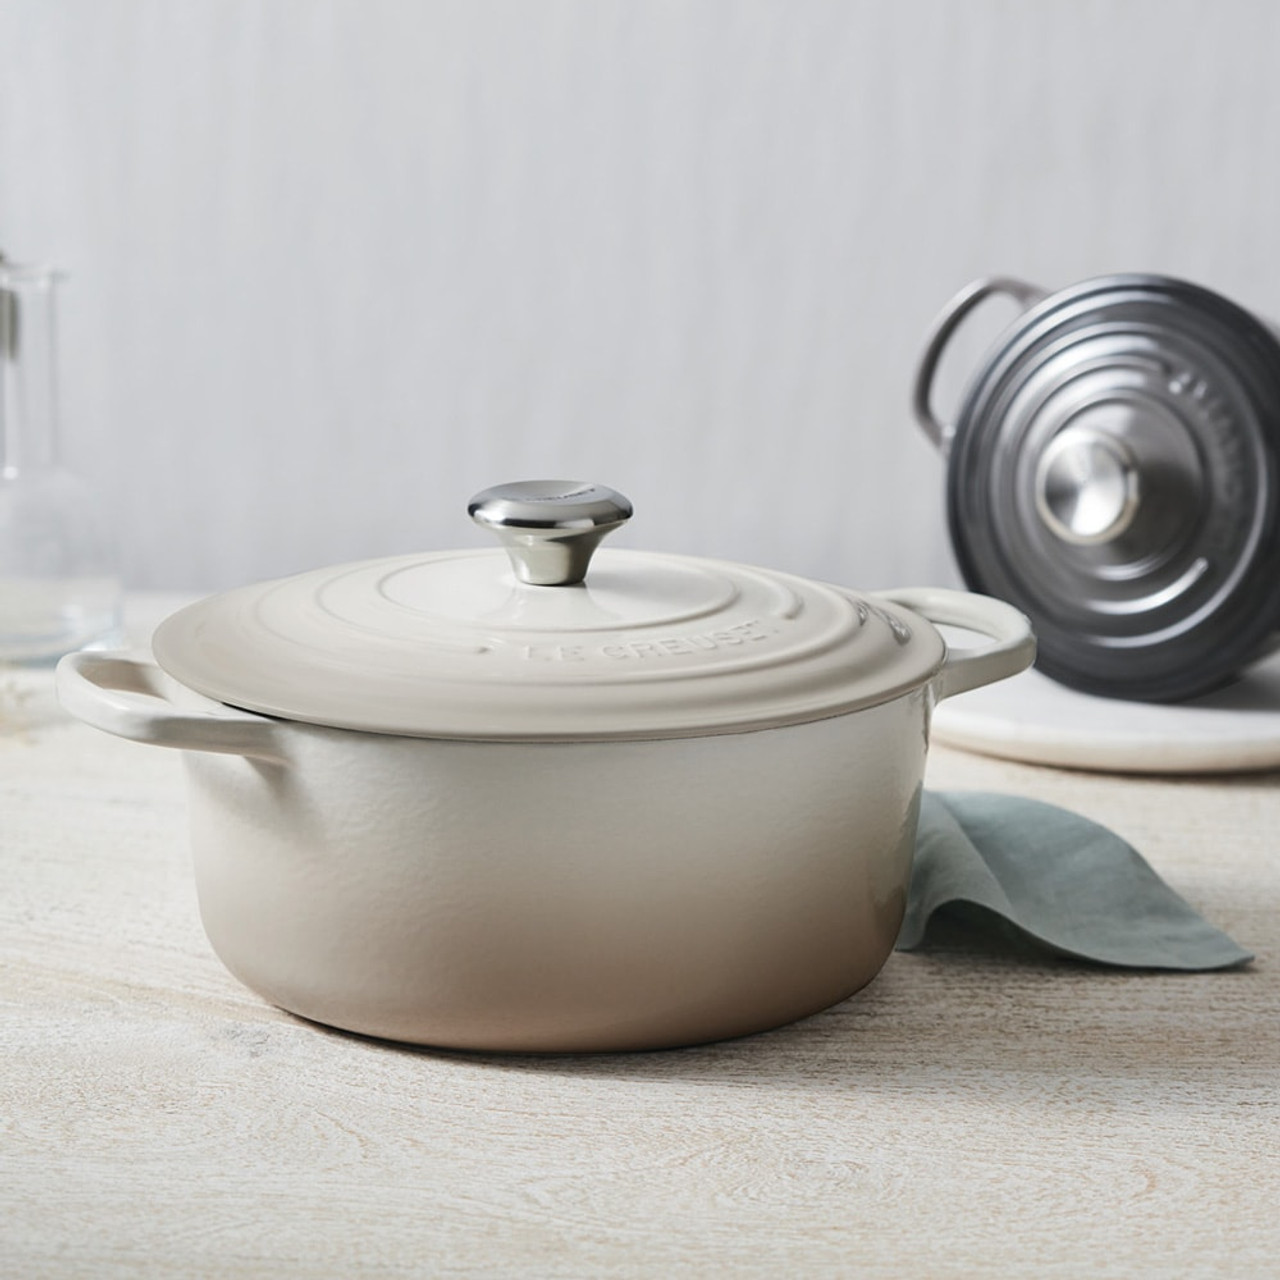 https://cdn11.bigcommerce.com/s-hccytny0od/images/stencil/1280x1280/products/2457/8483/le-creuset-round-dutch-oven-meringue-2__40555.1583787886.jpg?c=2?imbypass=on